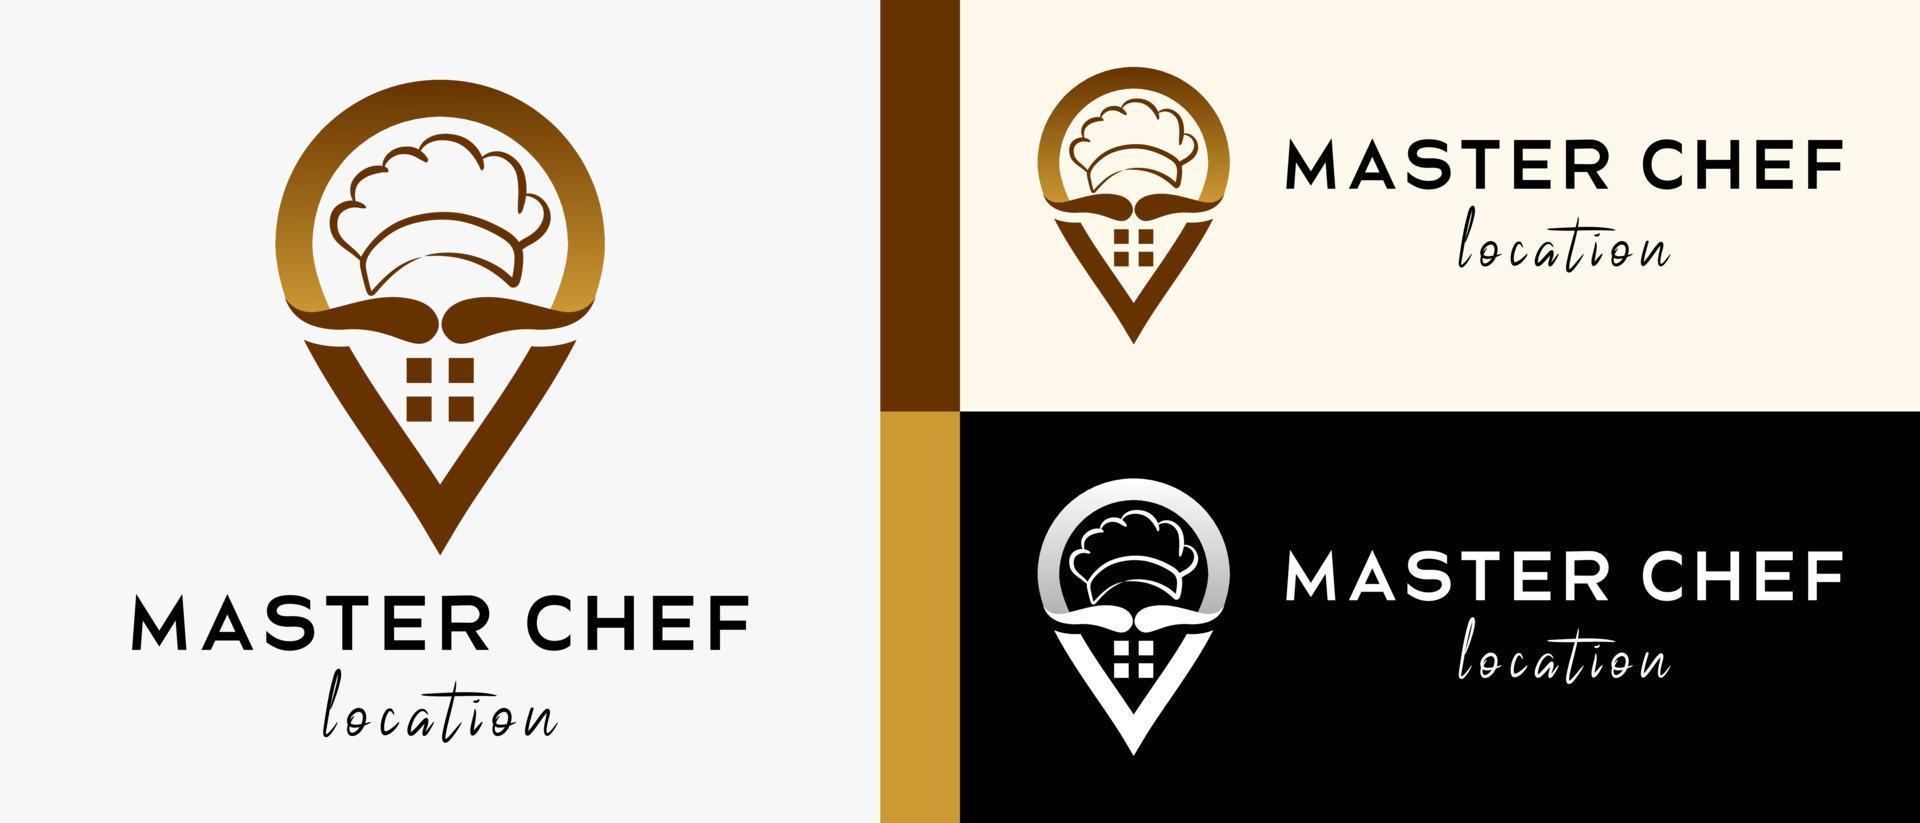 restaurant location logo design template with creative concept of chef hat and mustache in pin icon. map or location icon vector illustration, premium vector